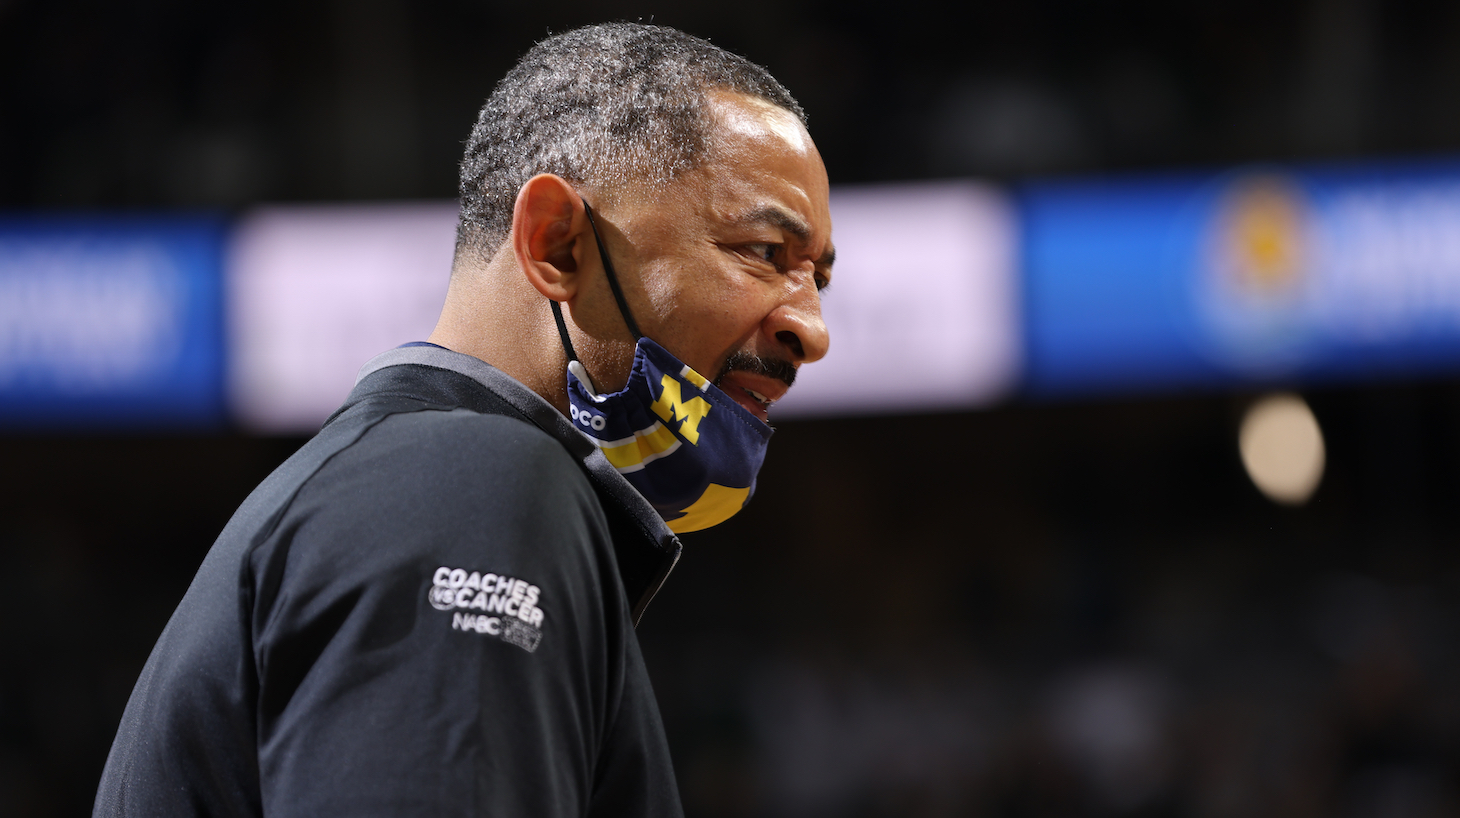 Head coach Juwan Howard of the Michigan Wolverines reacts in the second half of the game against the Michigan State Spartans at Breslin Center on January 29, 2022 in East Lansing, Michigan.